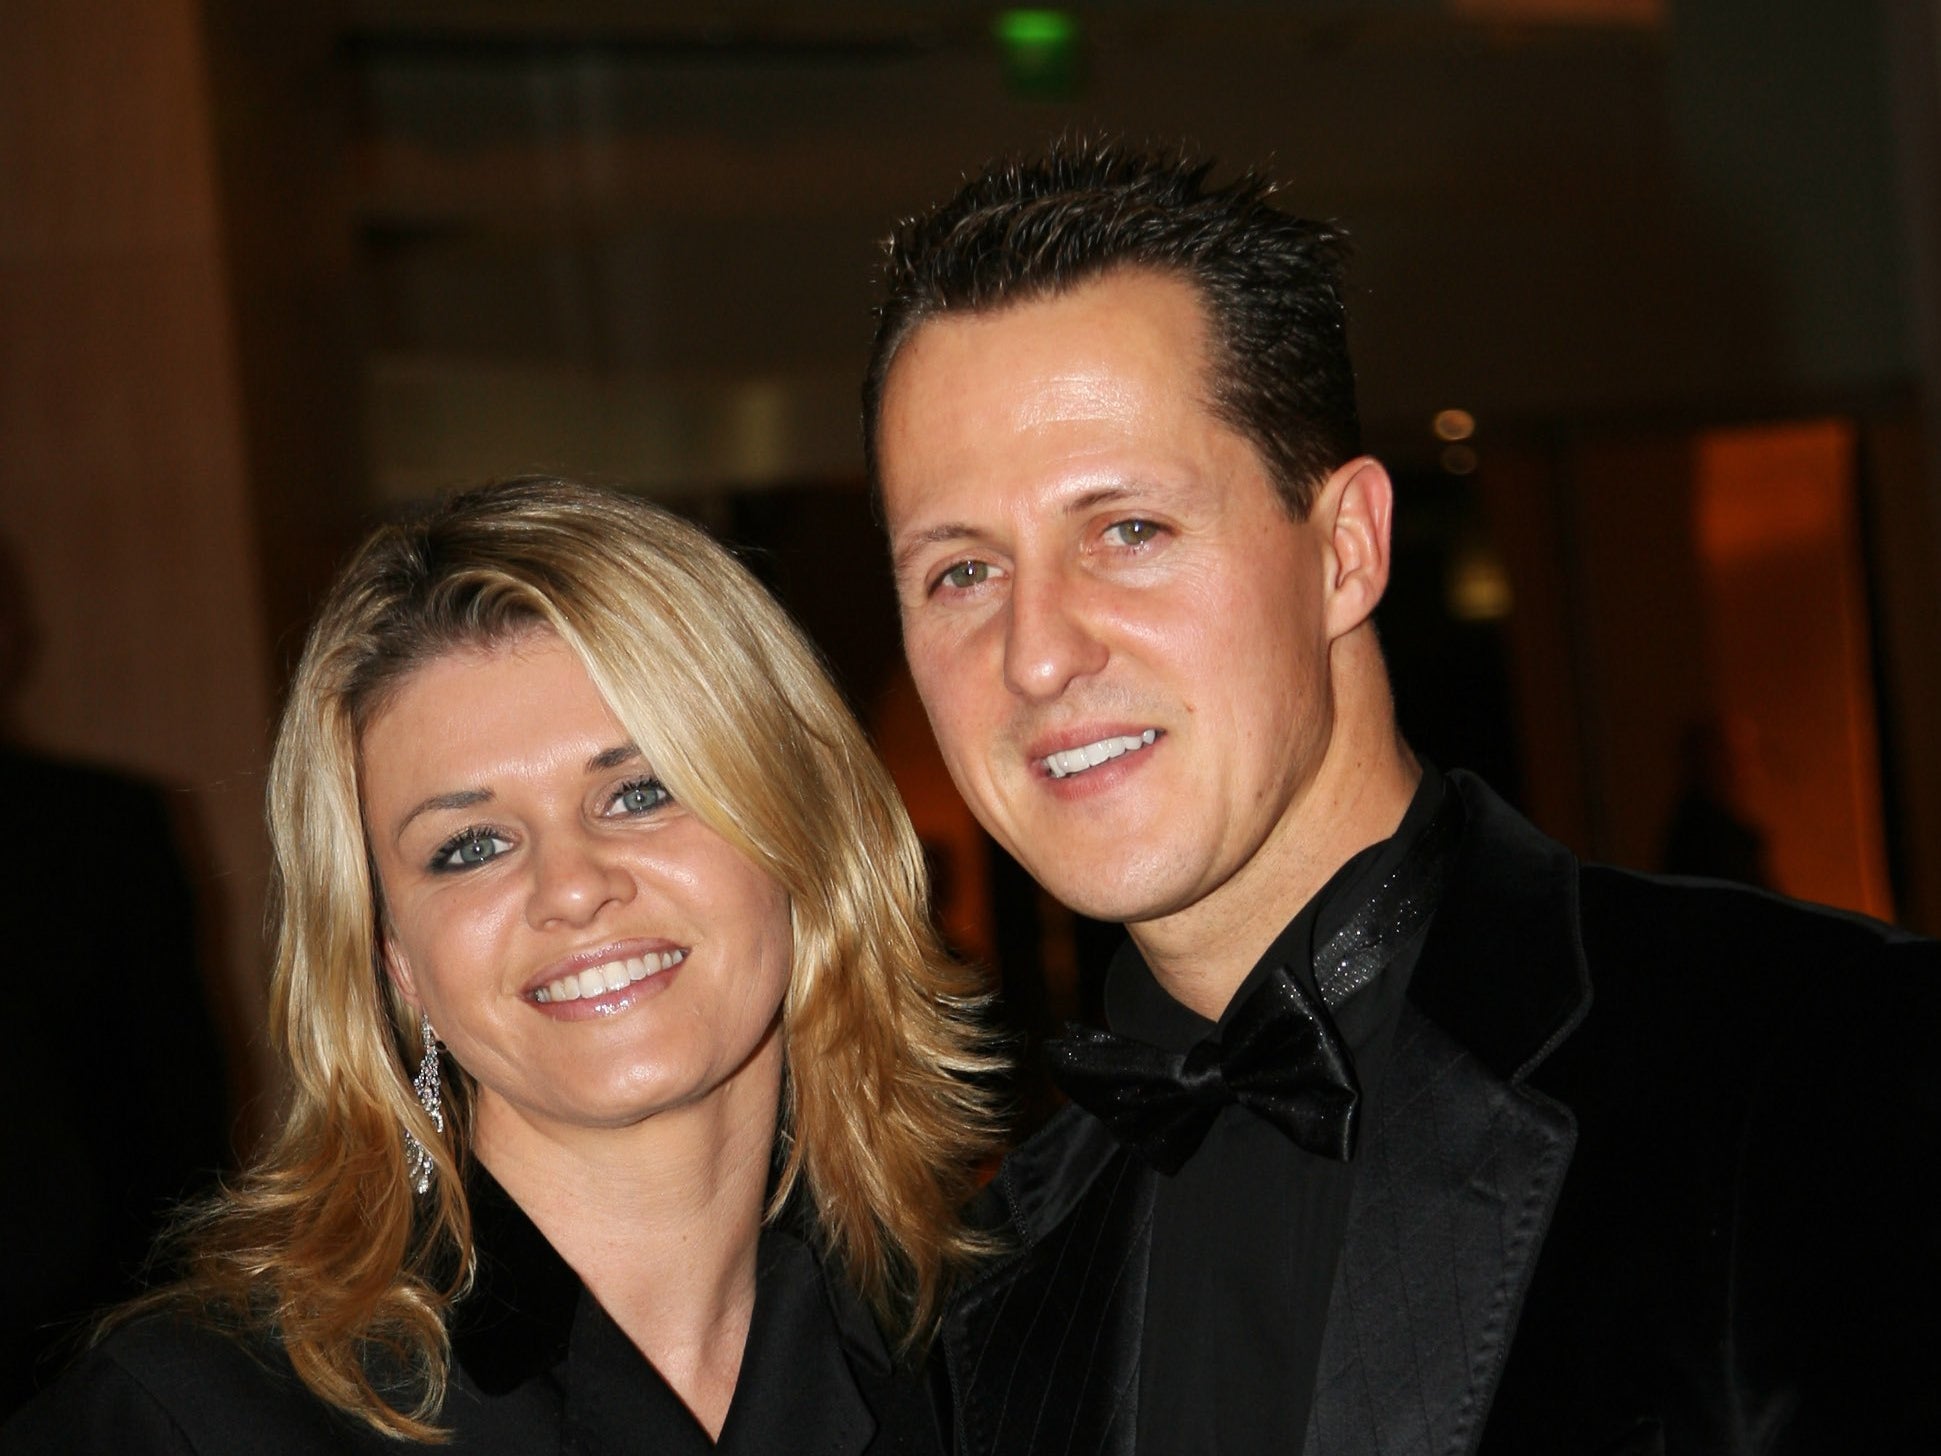 Michael Schumacher’s family have been targeted with an alleged blackmail plot